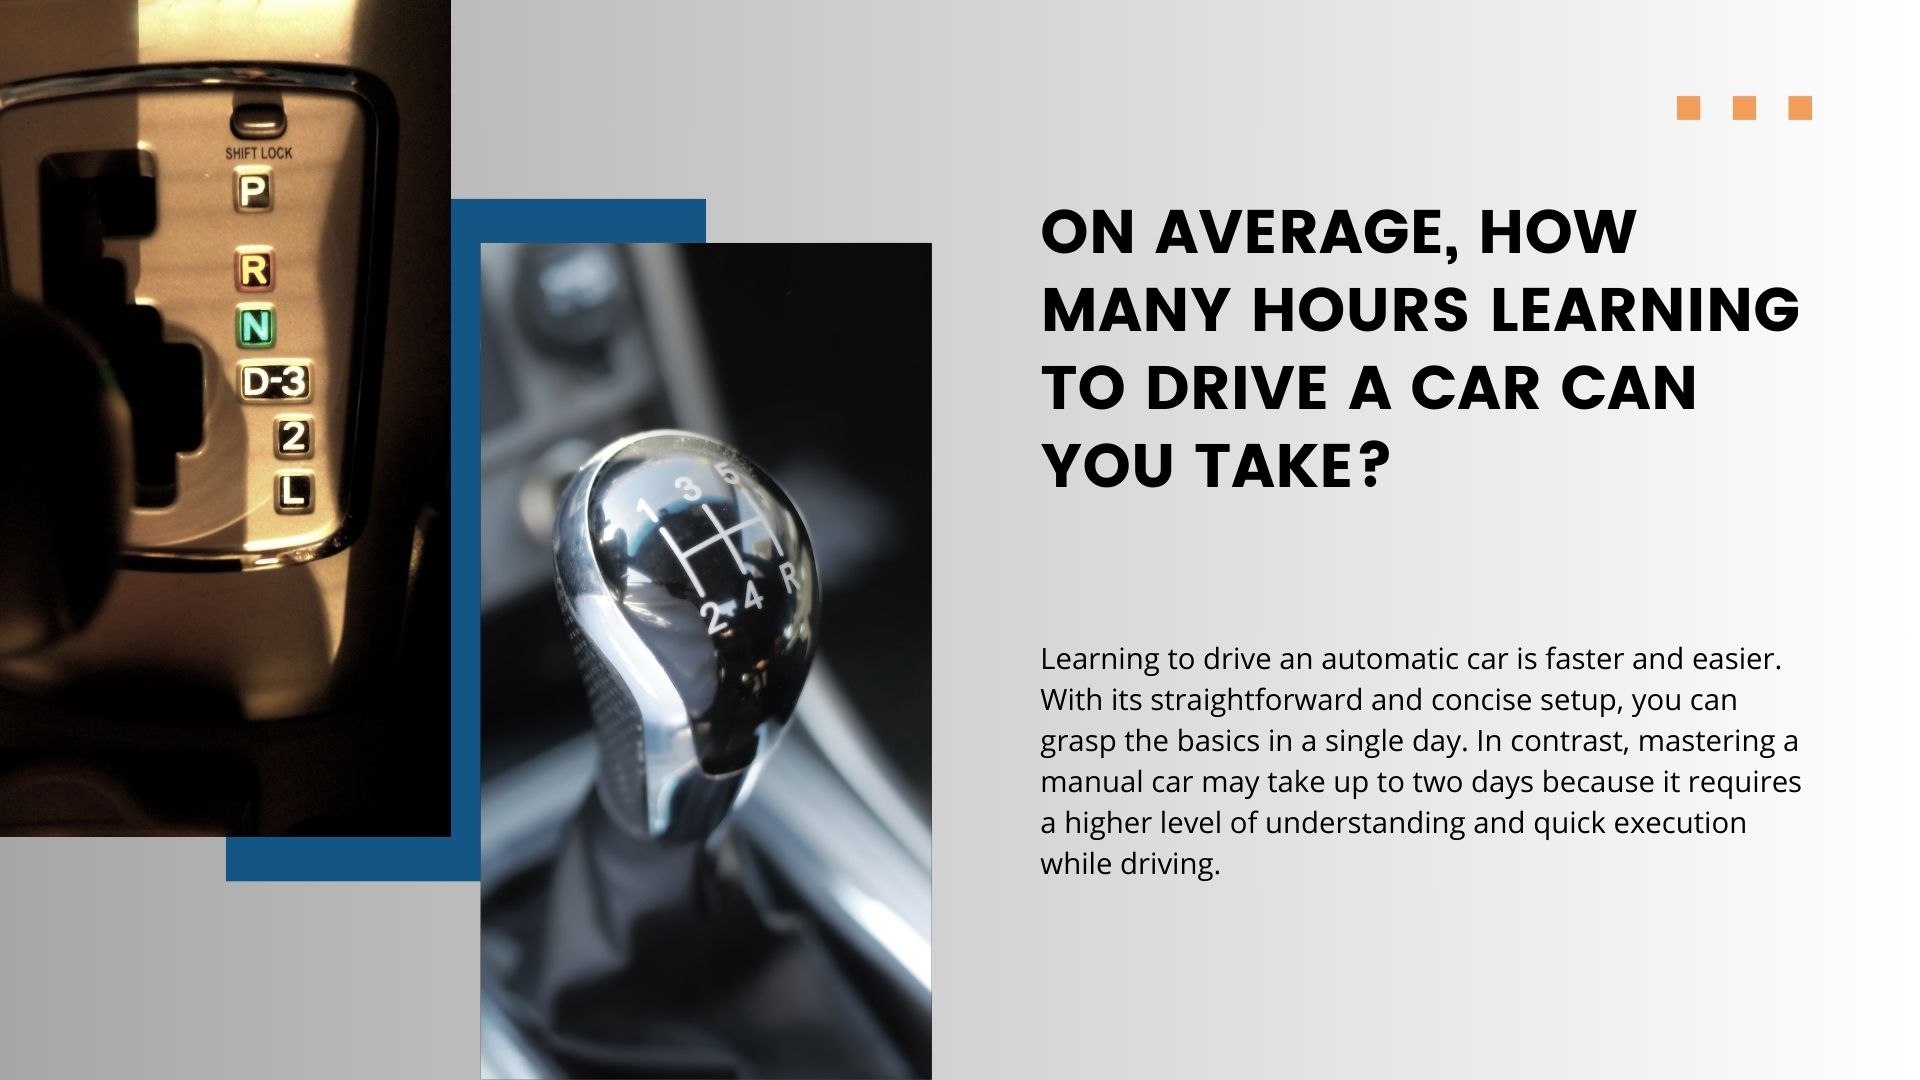 On Average, How Many Hours Learning to Drive a Car Can You Take?